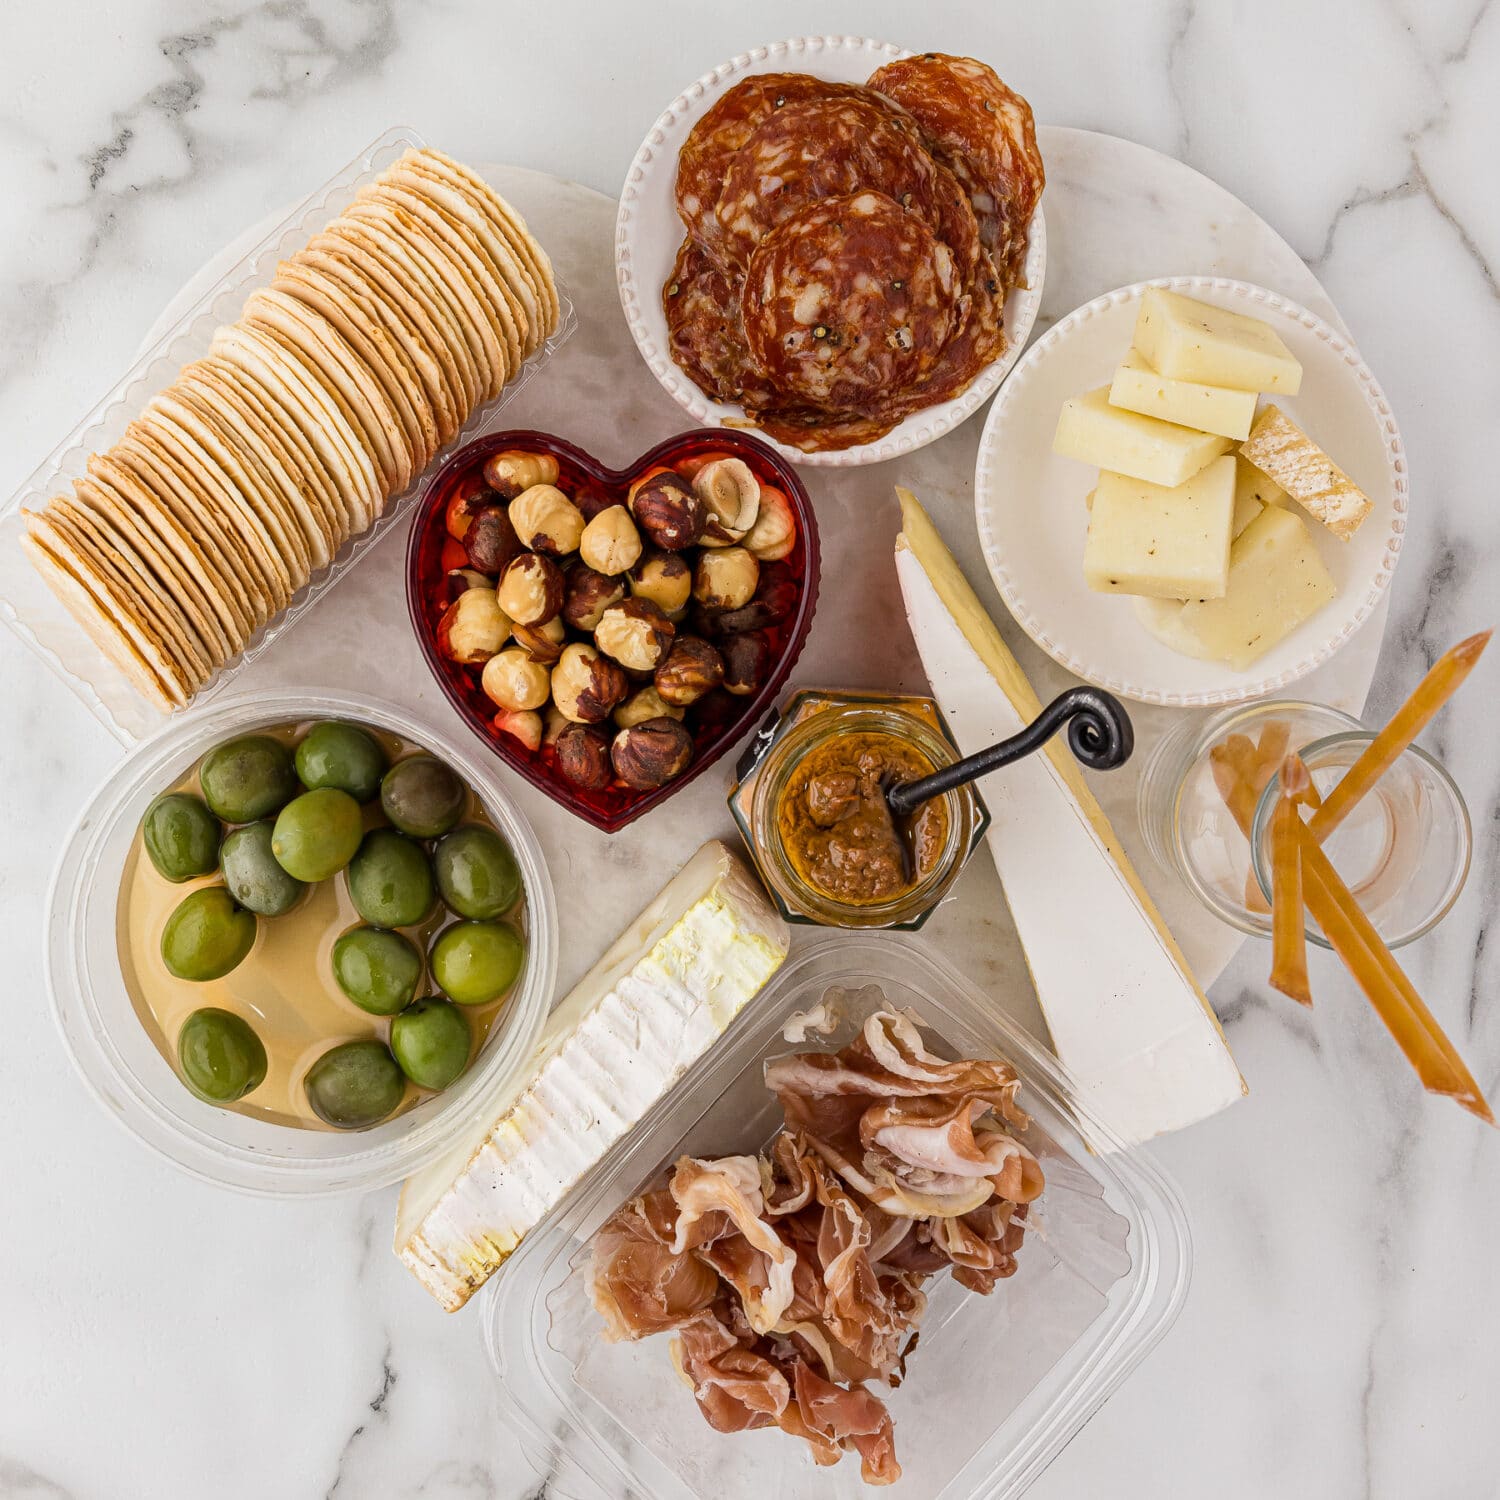 Crackers, Olives, Cheese and meats from an AppyHour Subscription box for charcuterie board